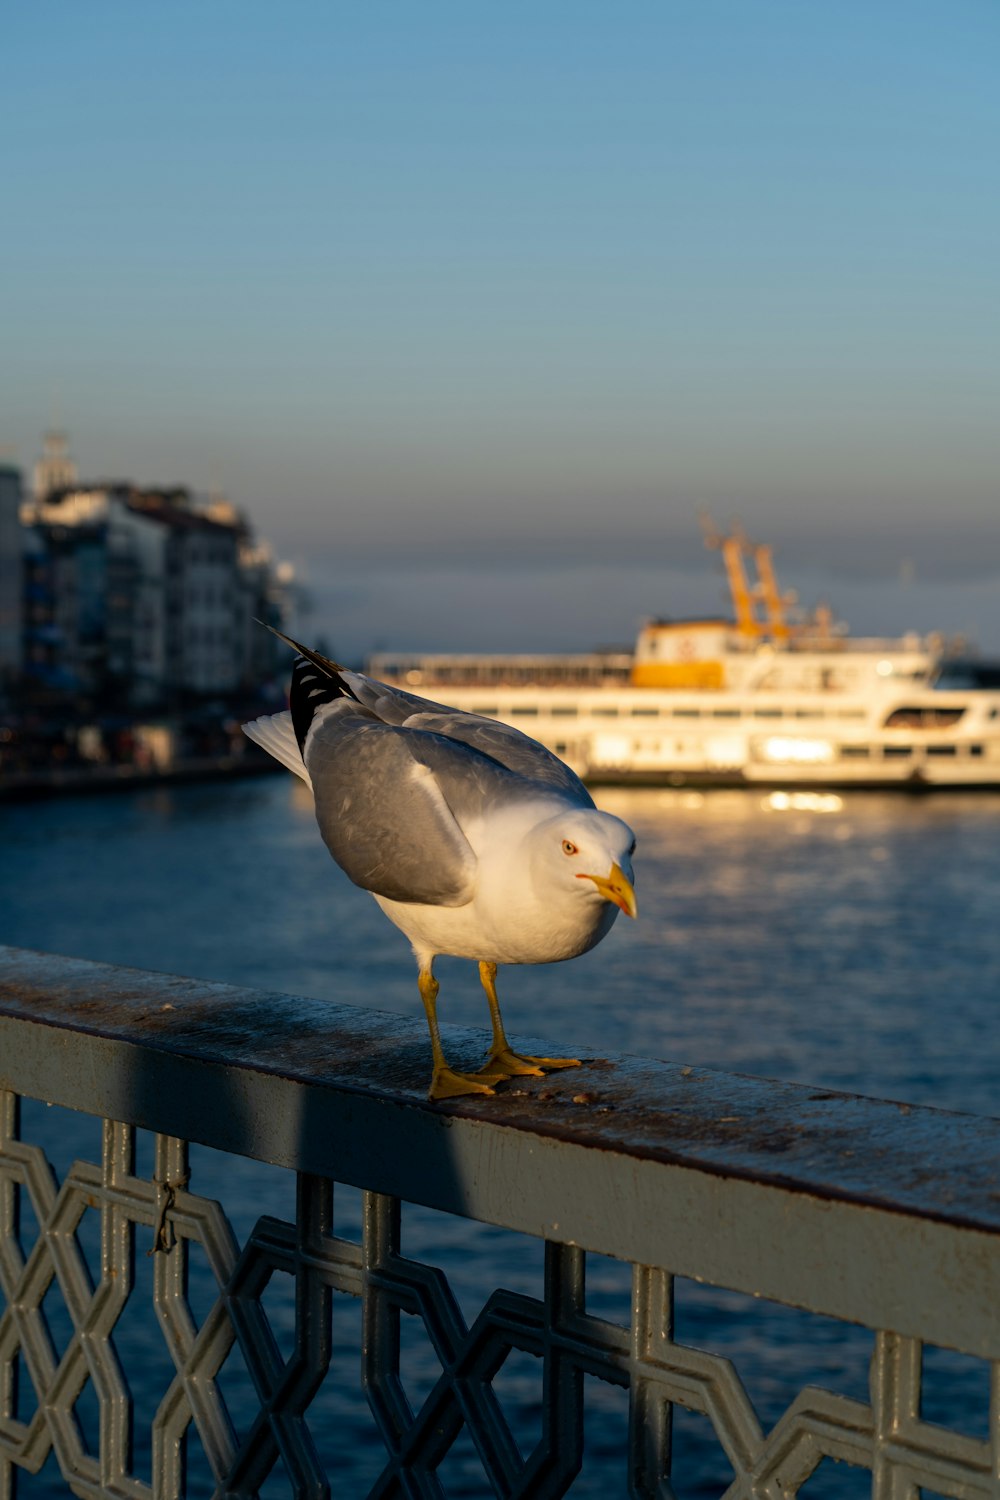 a seagull is standing on a railing near a boat